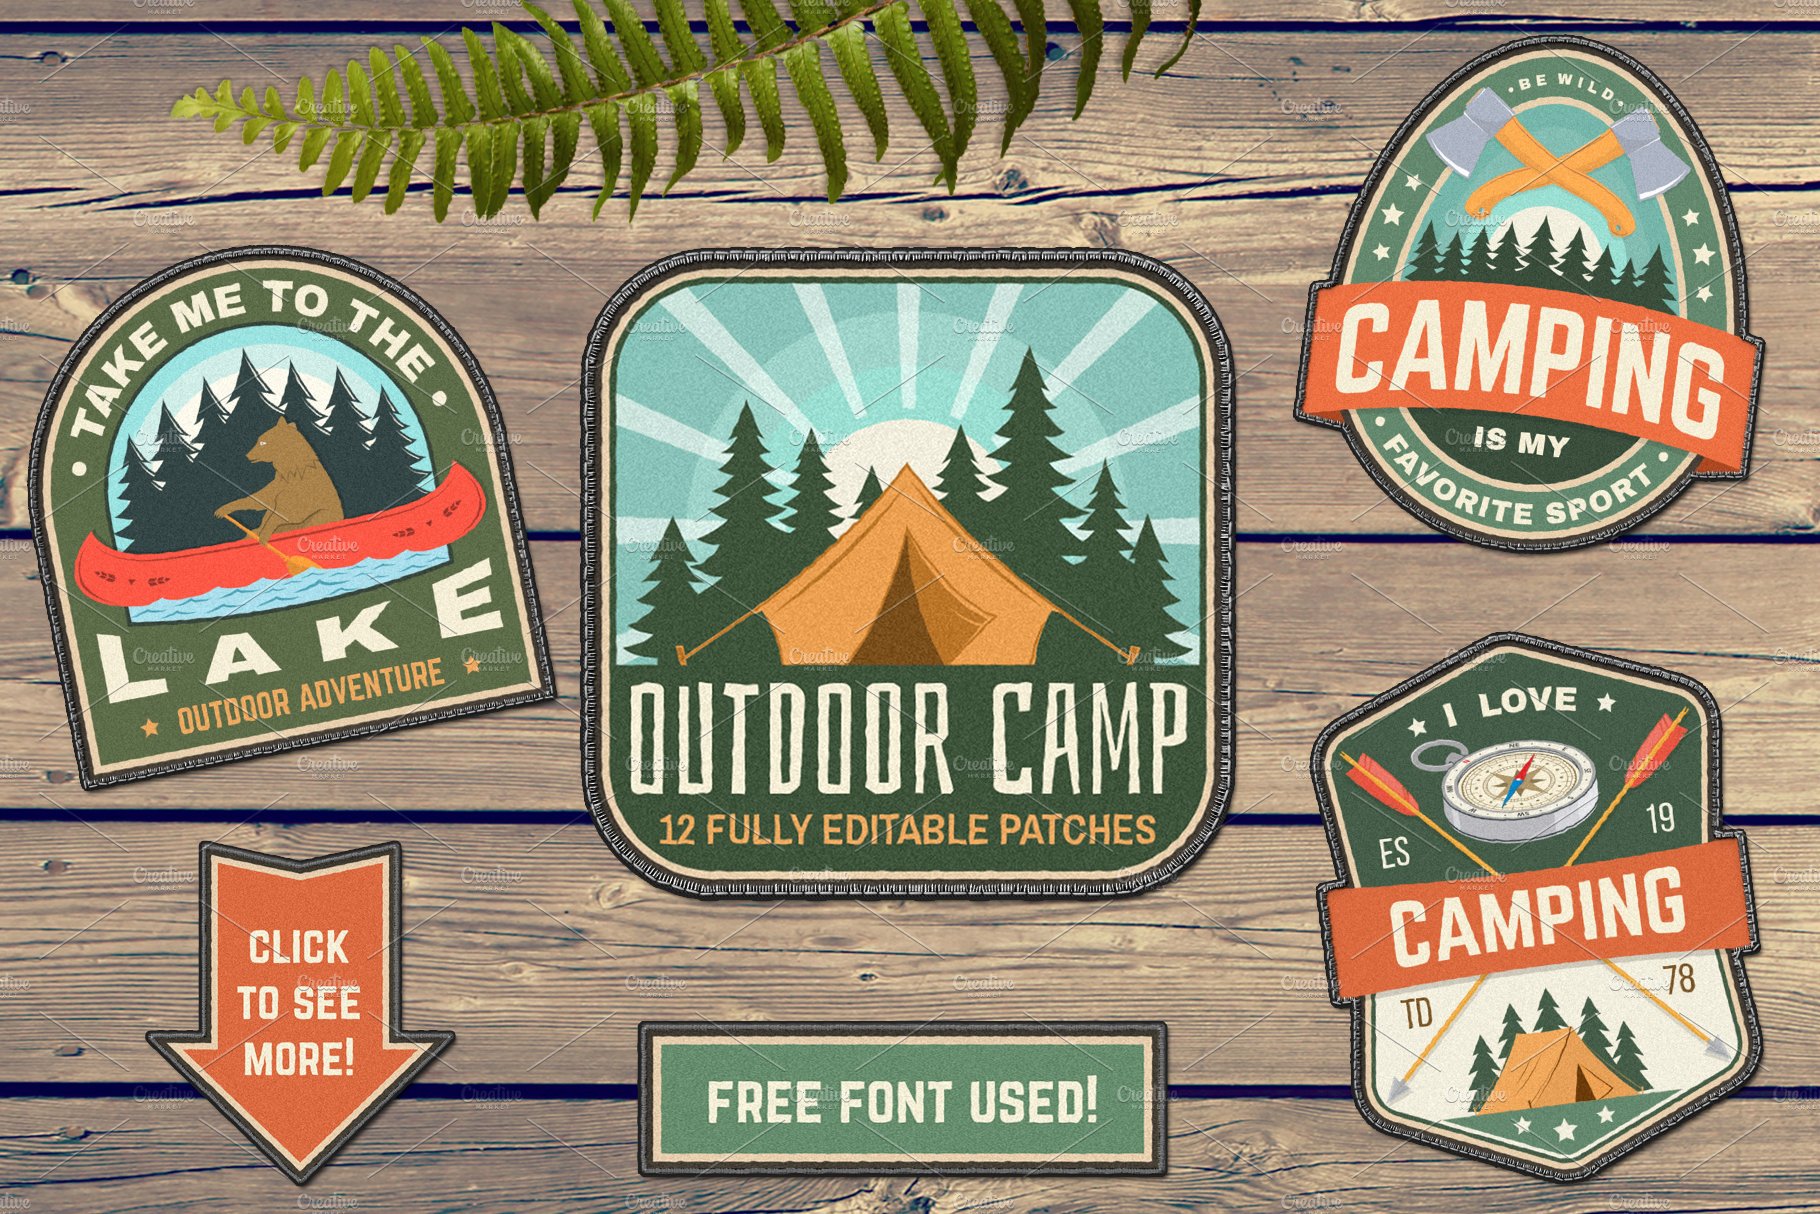 Outdoor Camp Patches cover image.